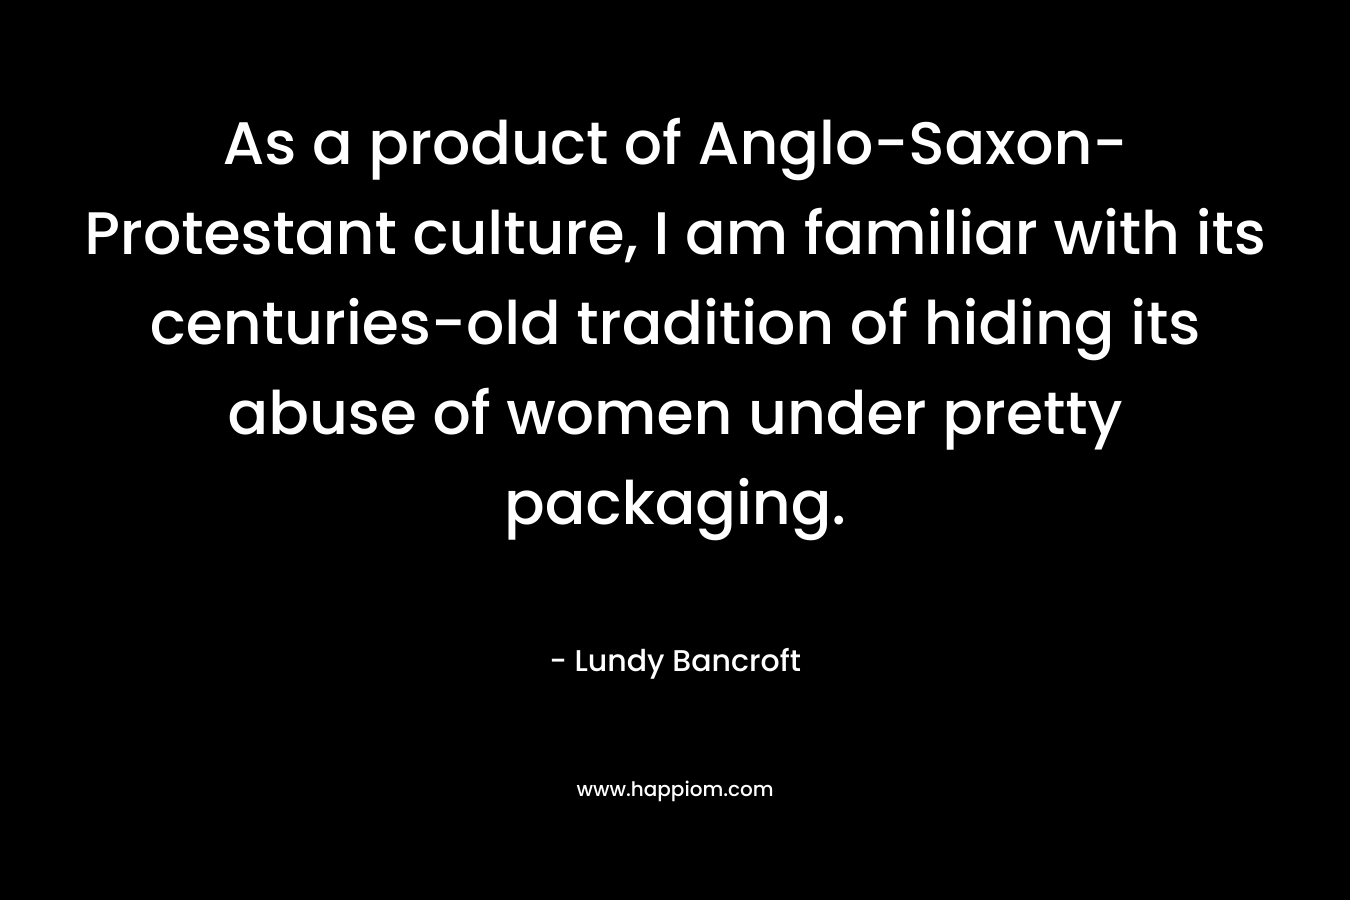 As a product of Anglo-Saxon-Protestant culture, I am familiar with its centuries-old tradition of hiding its abuse of women under pretty packaging.